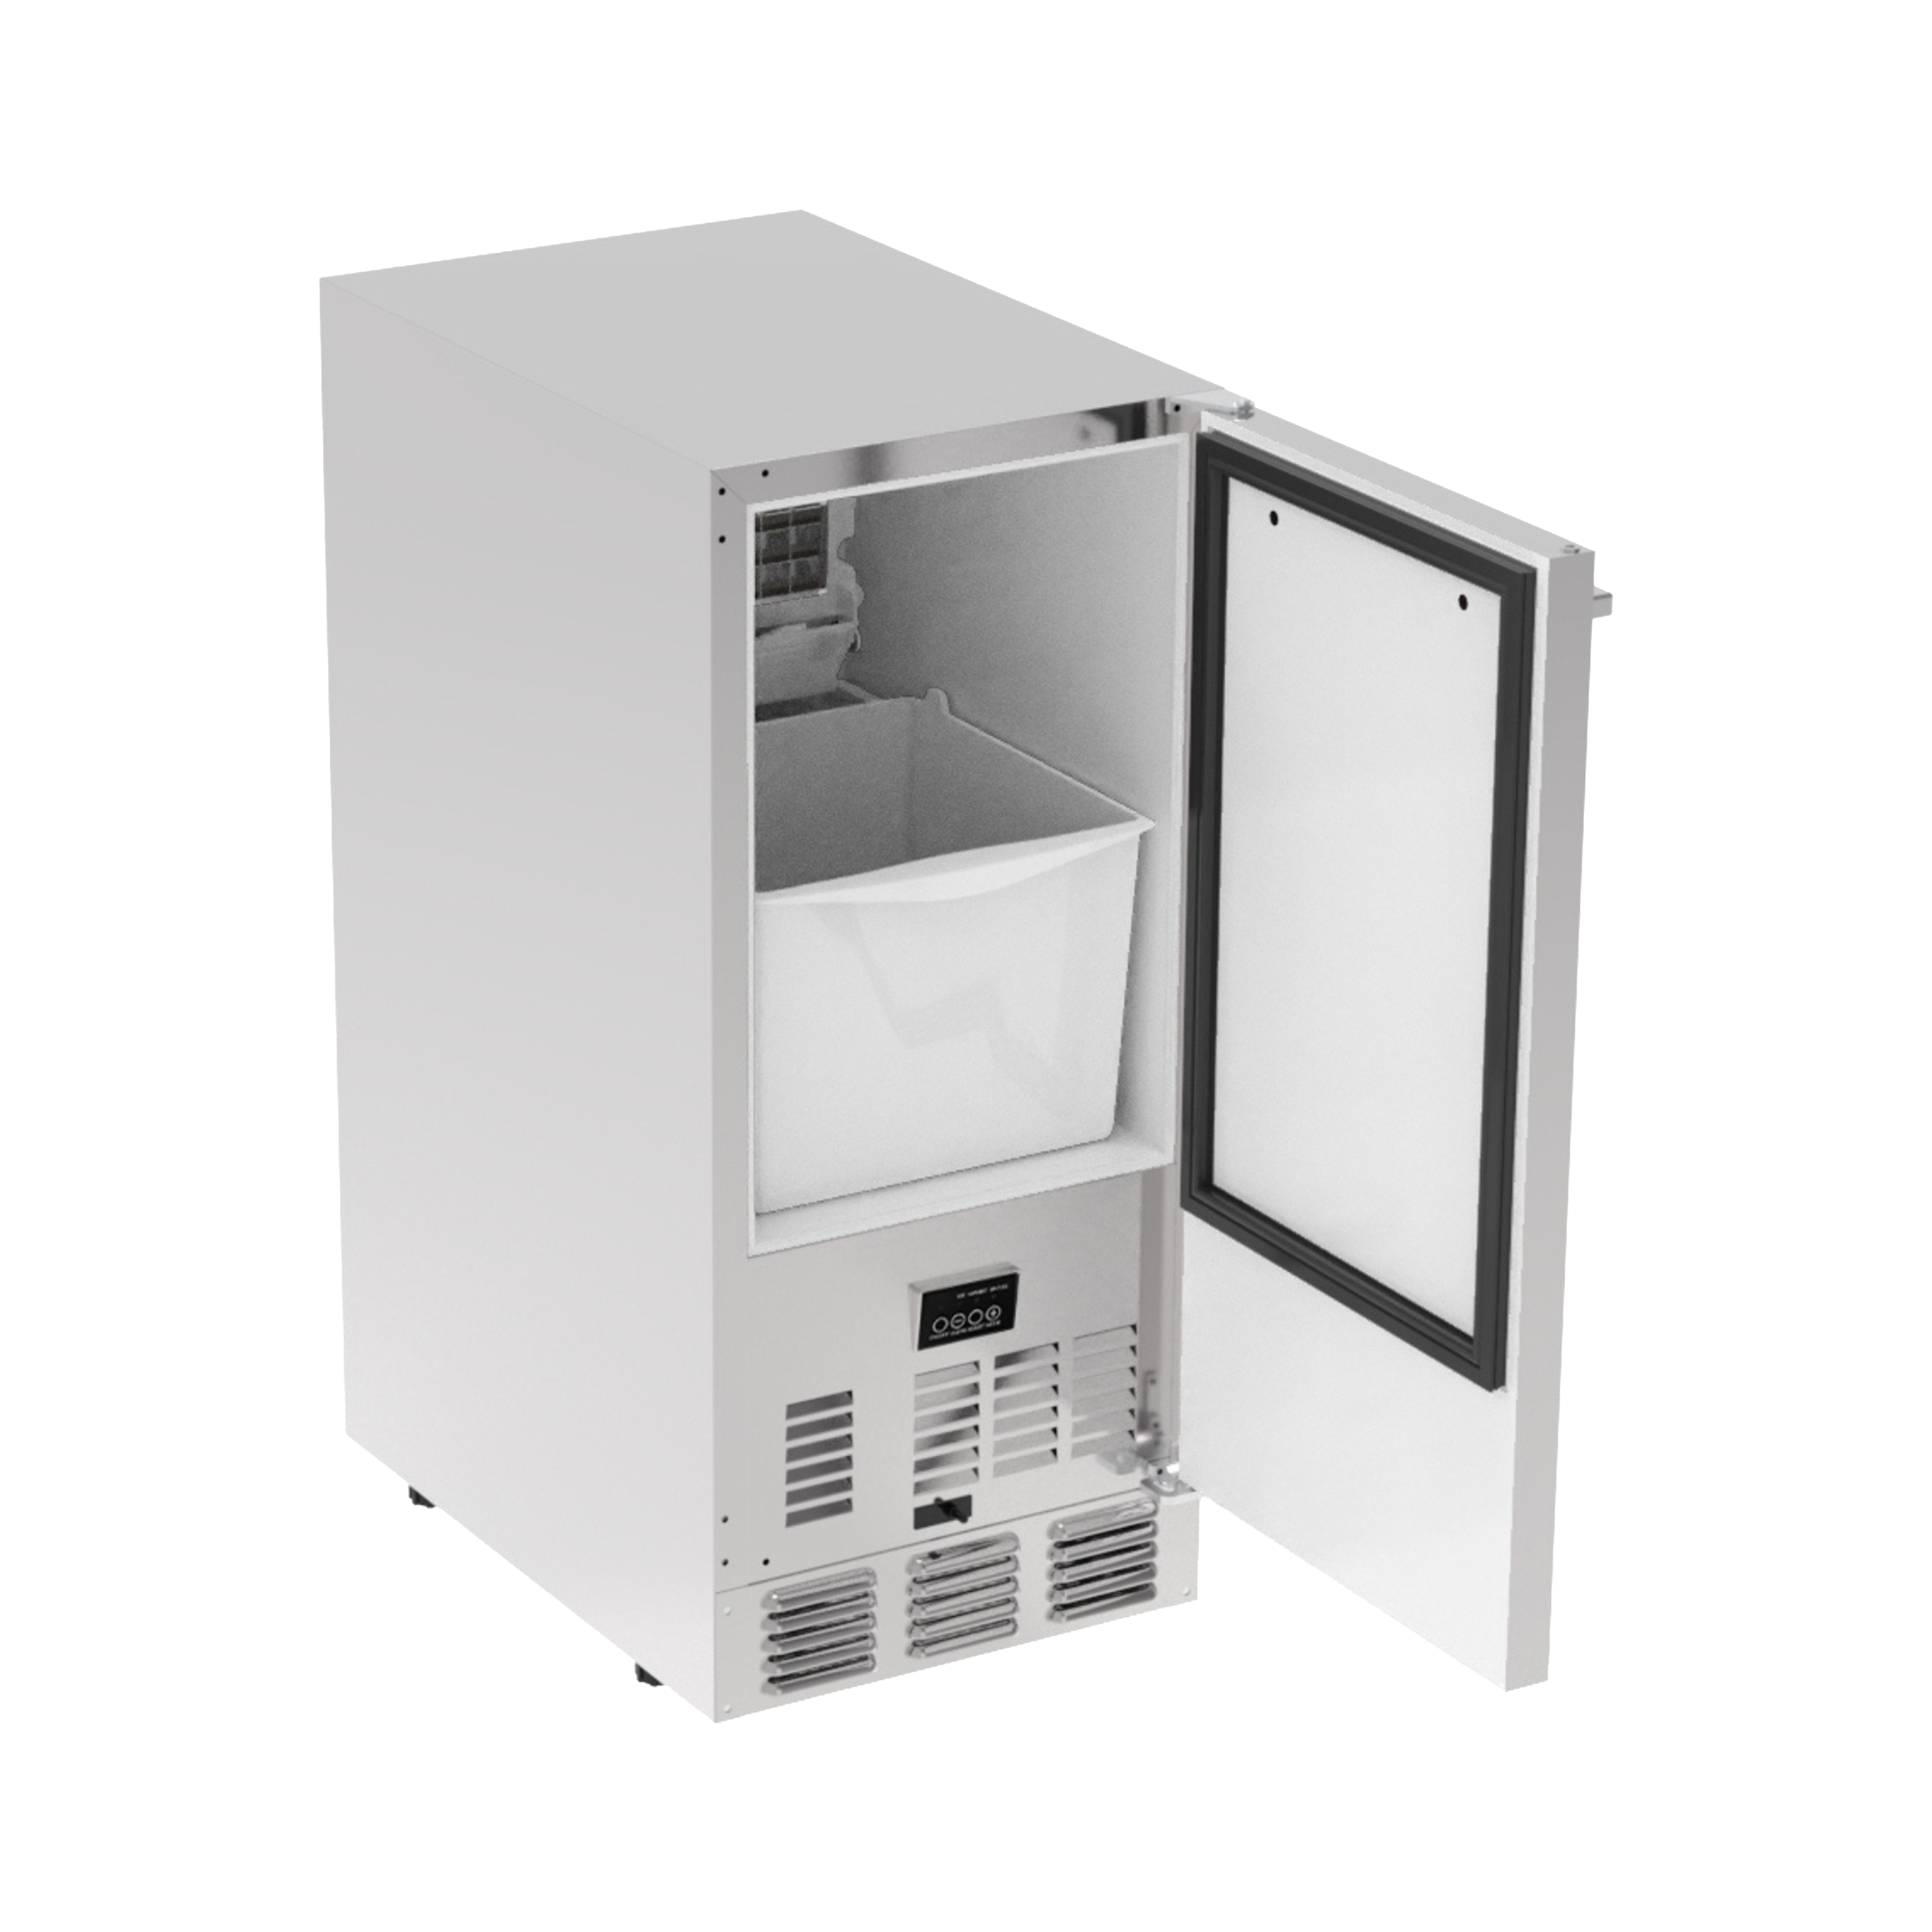 Side view of a 60 lbs Stainless Steel Outdoor Refrigerator Ice Maker with the door open, exposing the ice making compartment